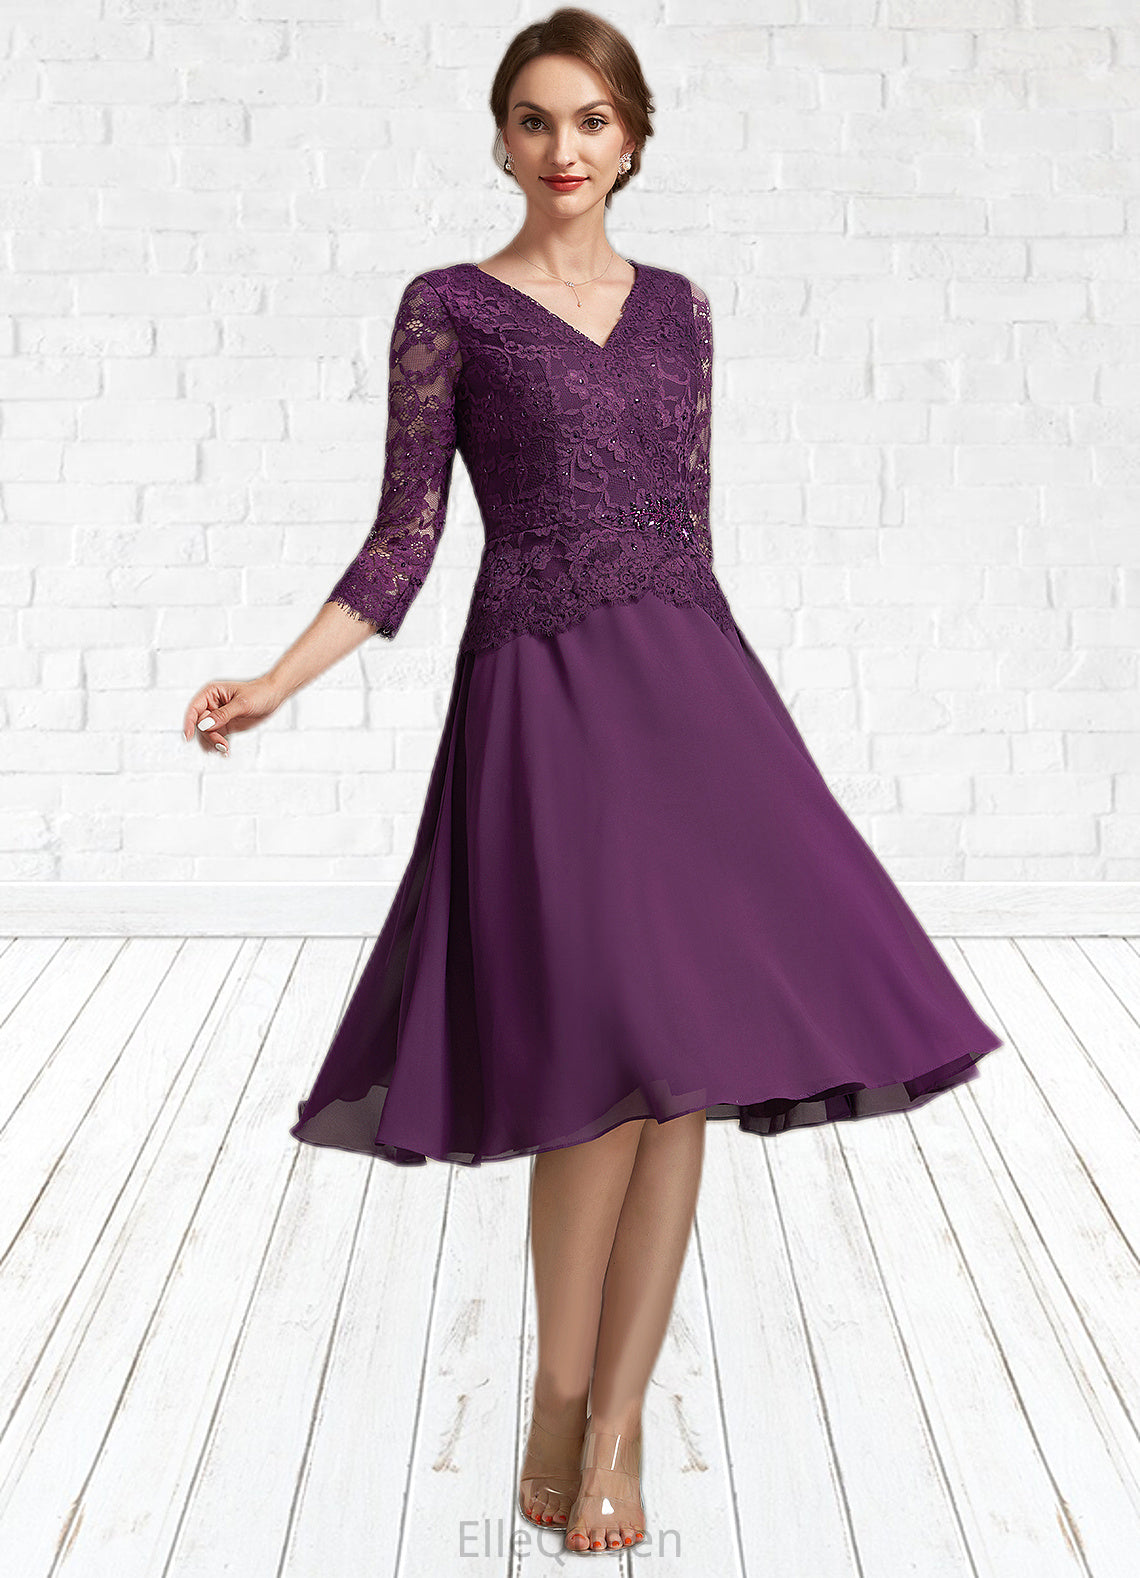 Adelyn A-Line V-neck Knee-Length Chiffon Lace Mother of the Bride Dress With Beading Sequins DG126P0015035